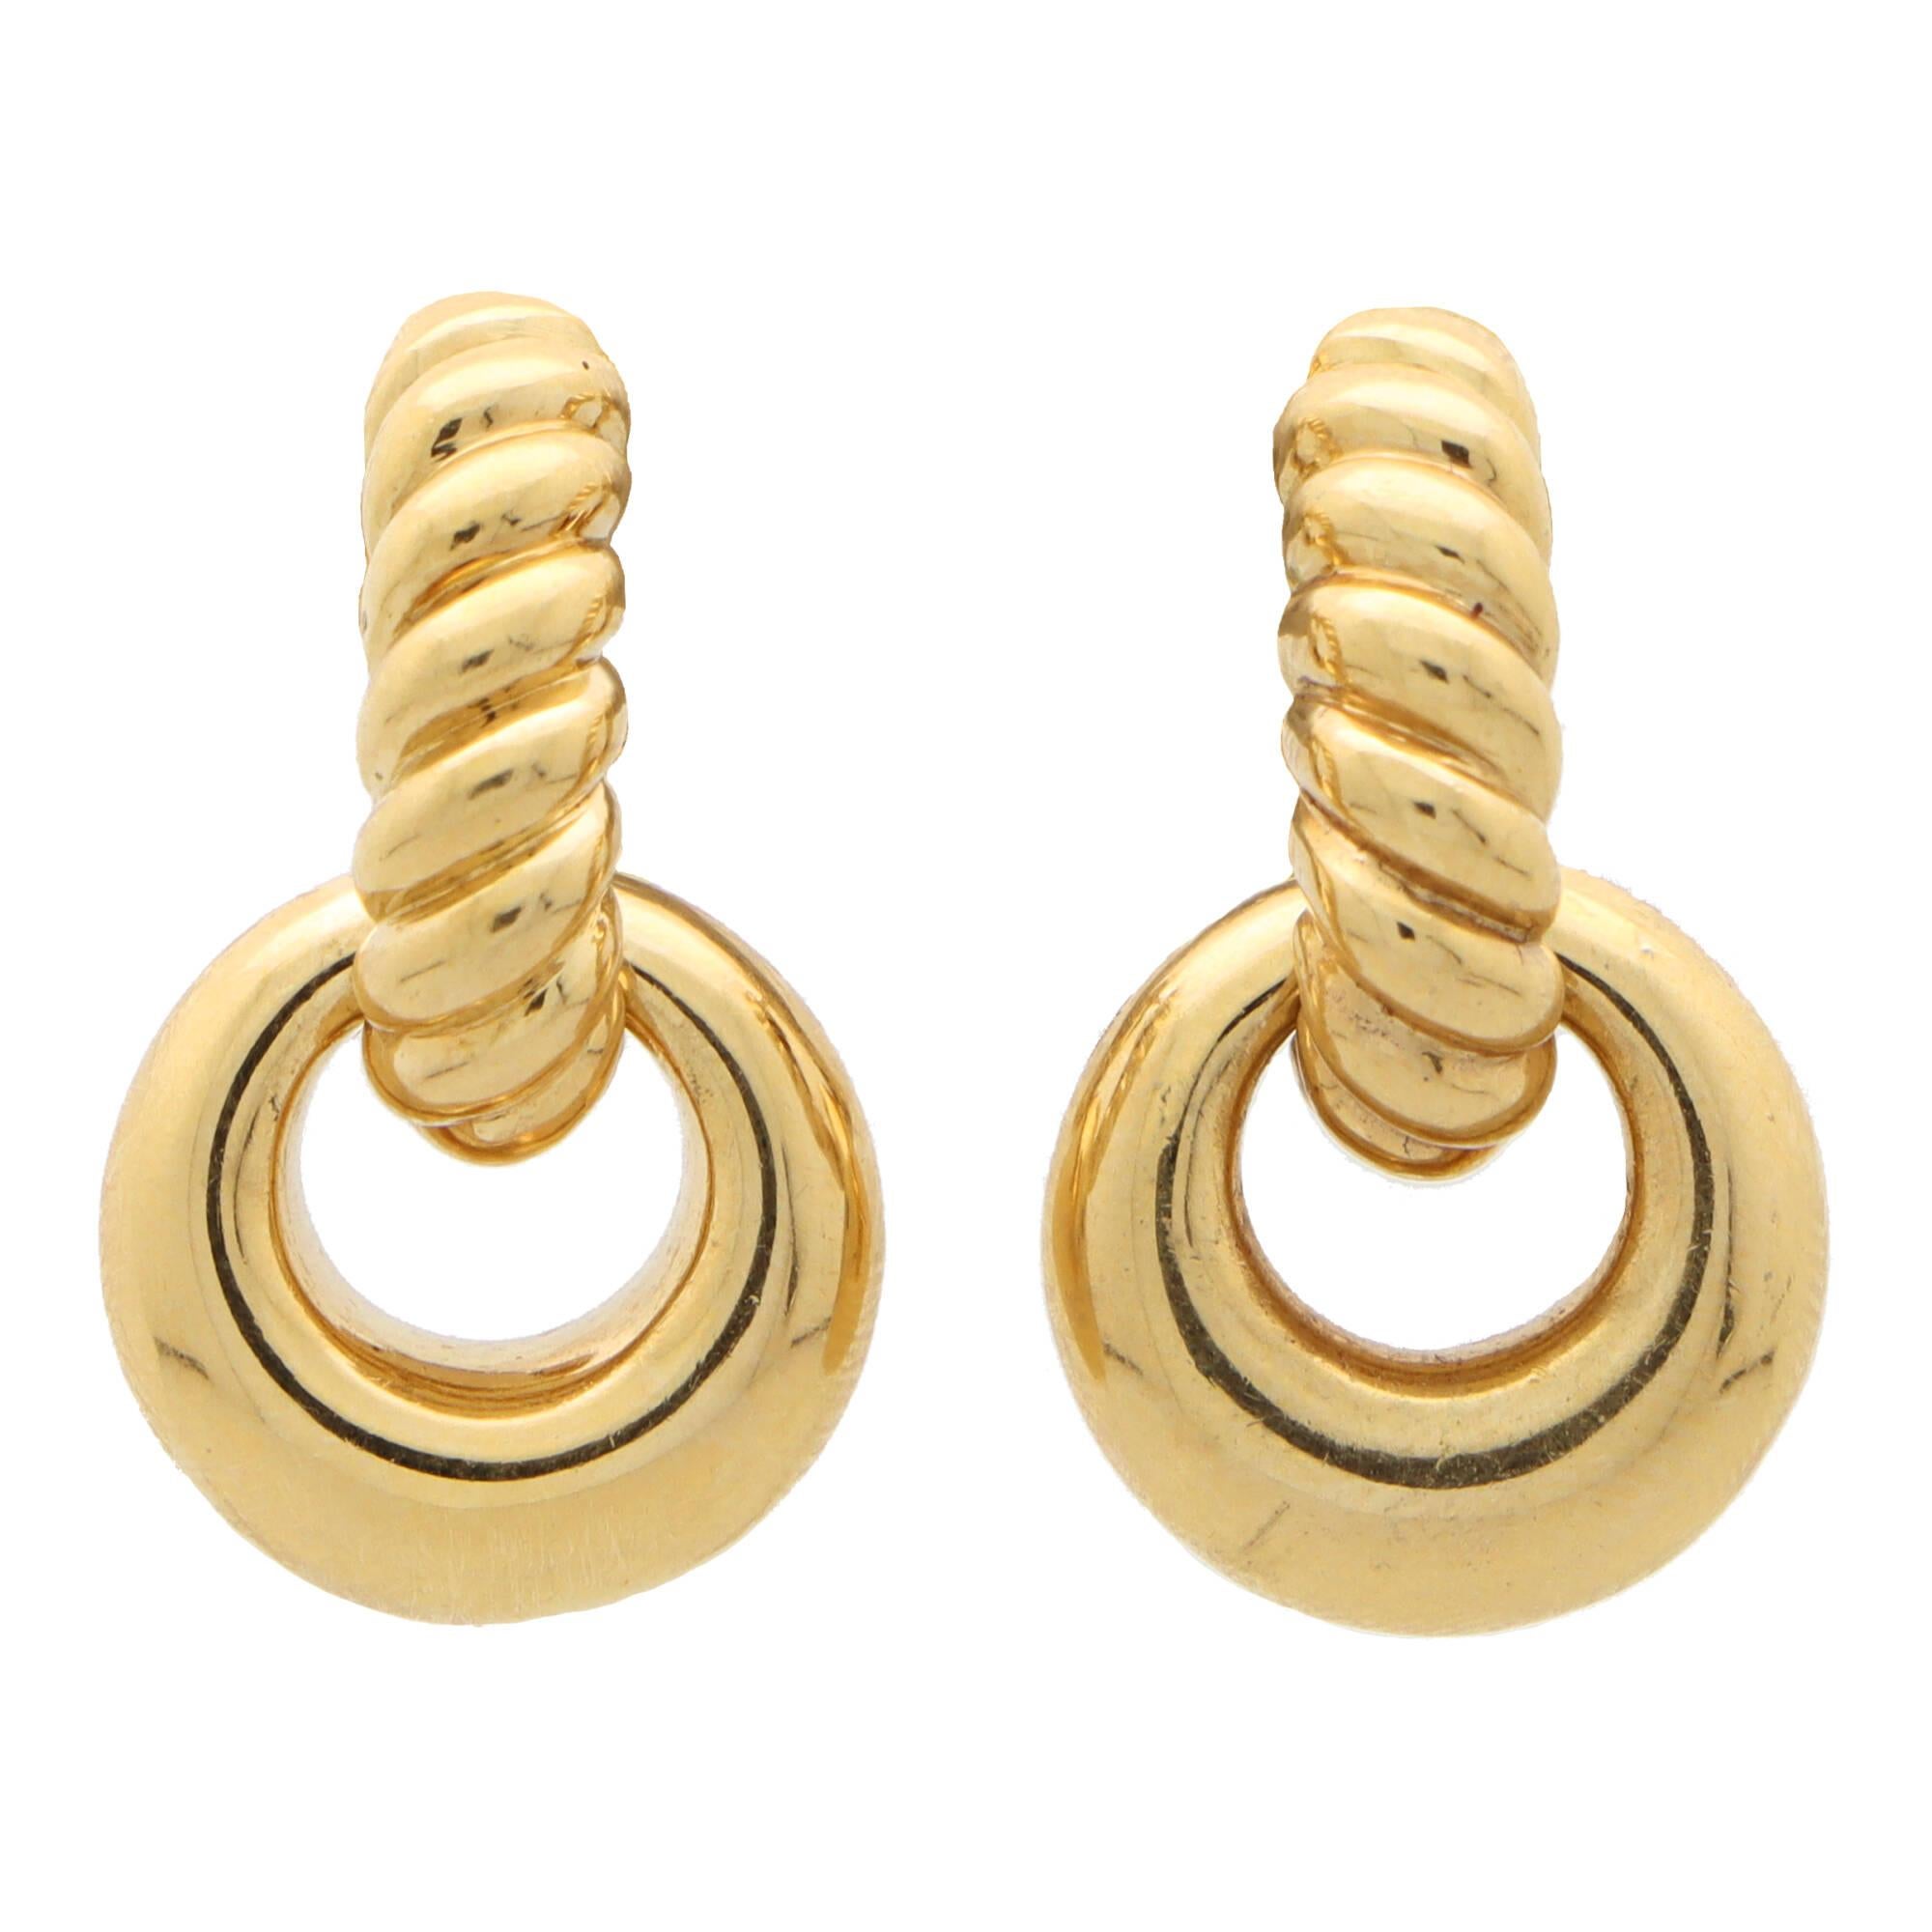 Vintage Pomellato Convertible Twisted Hoop Earrings in 18k Yellow Gold In Excellent Condition For Sale In London, GB